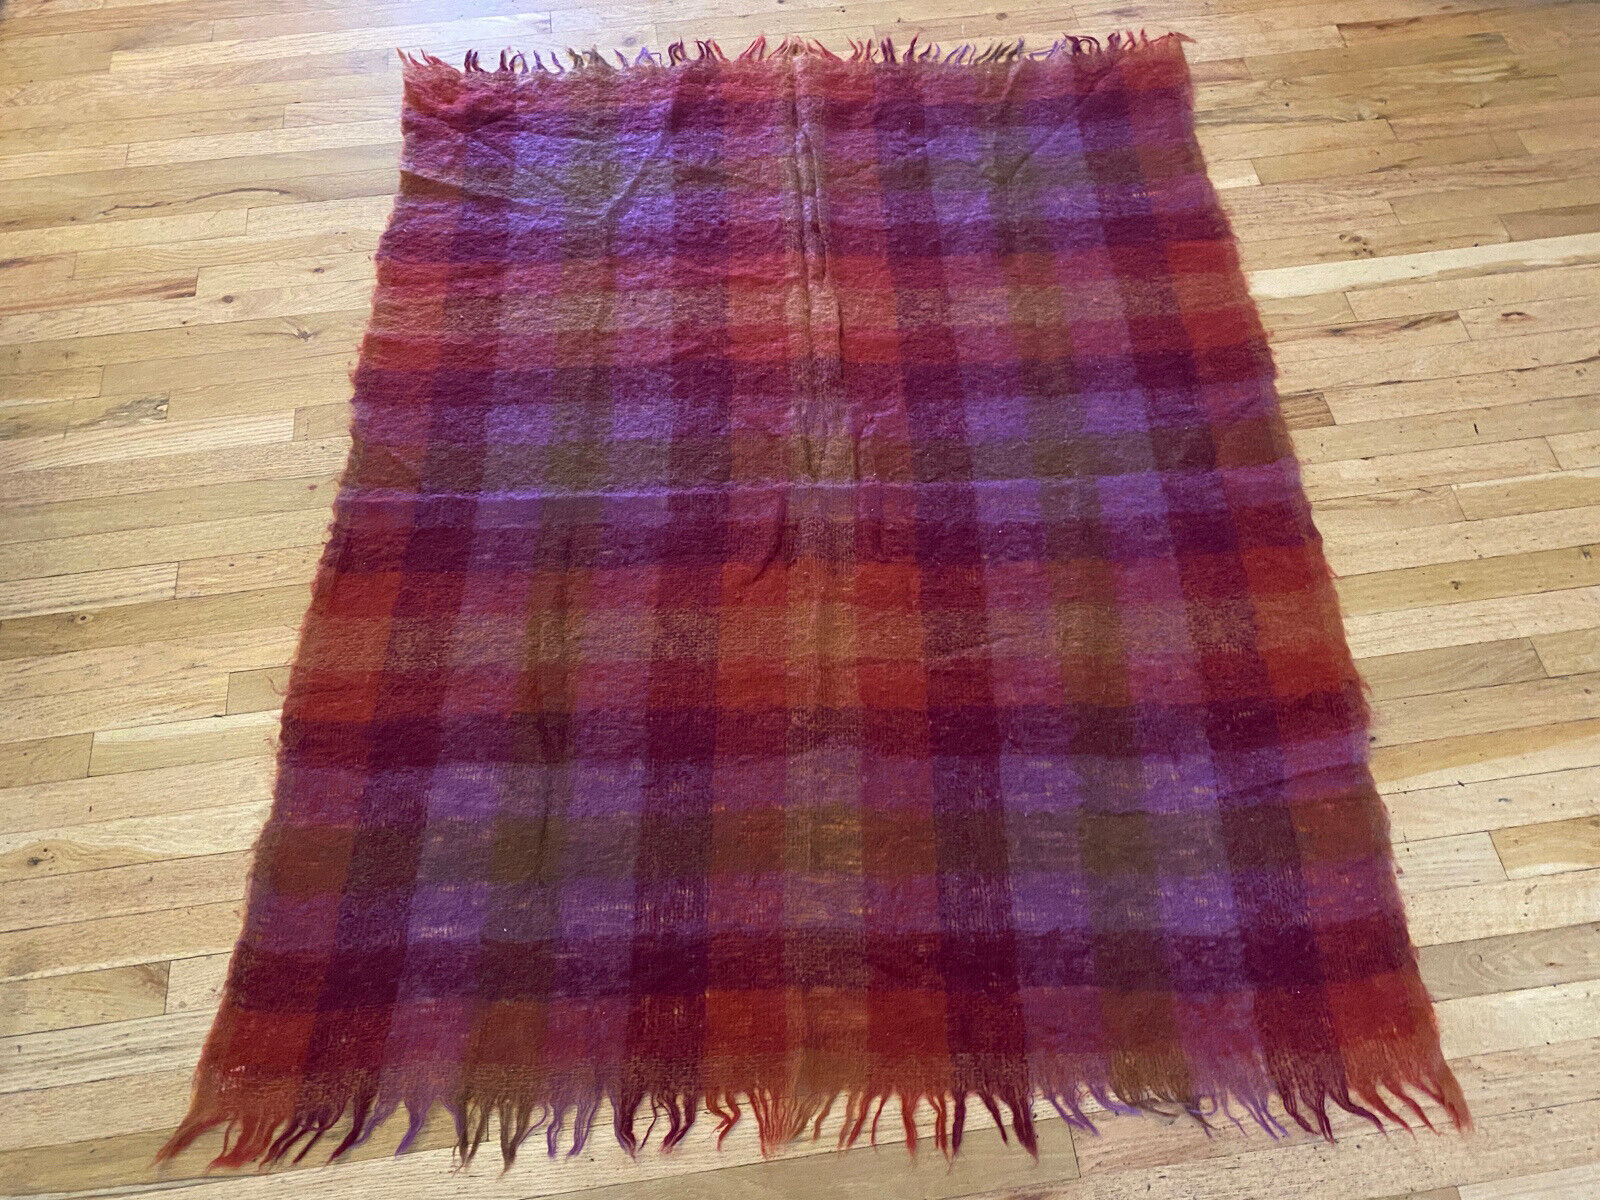 Marshall Fields Vintage 100% Wool Loose Woven Fringed Throw Blanket